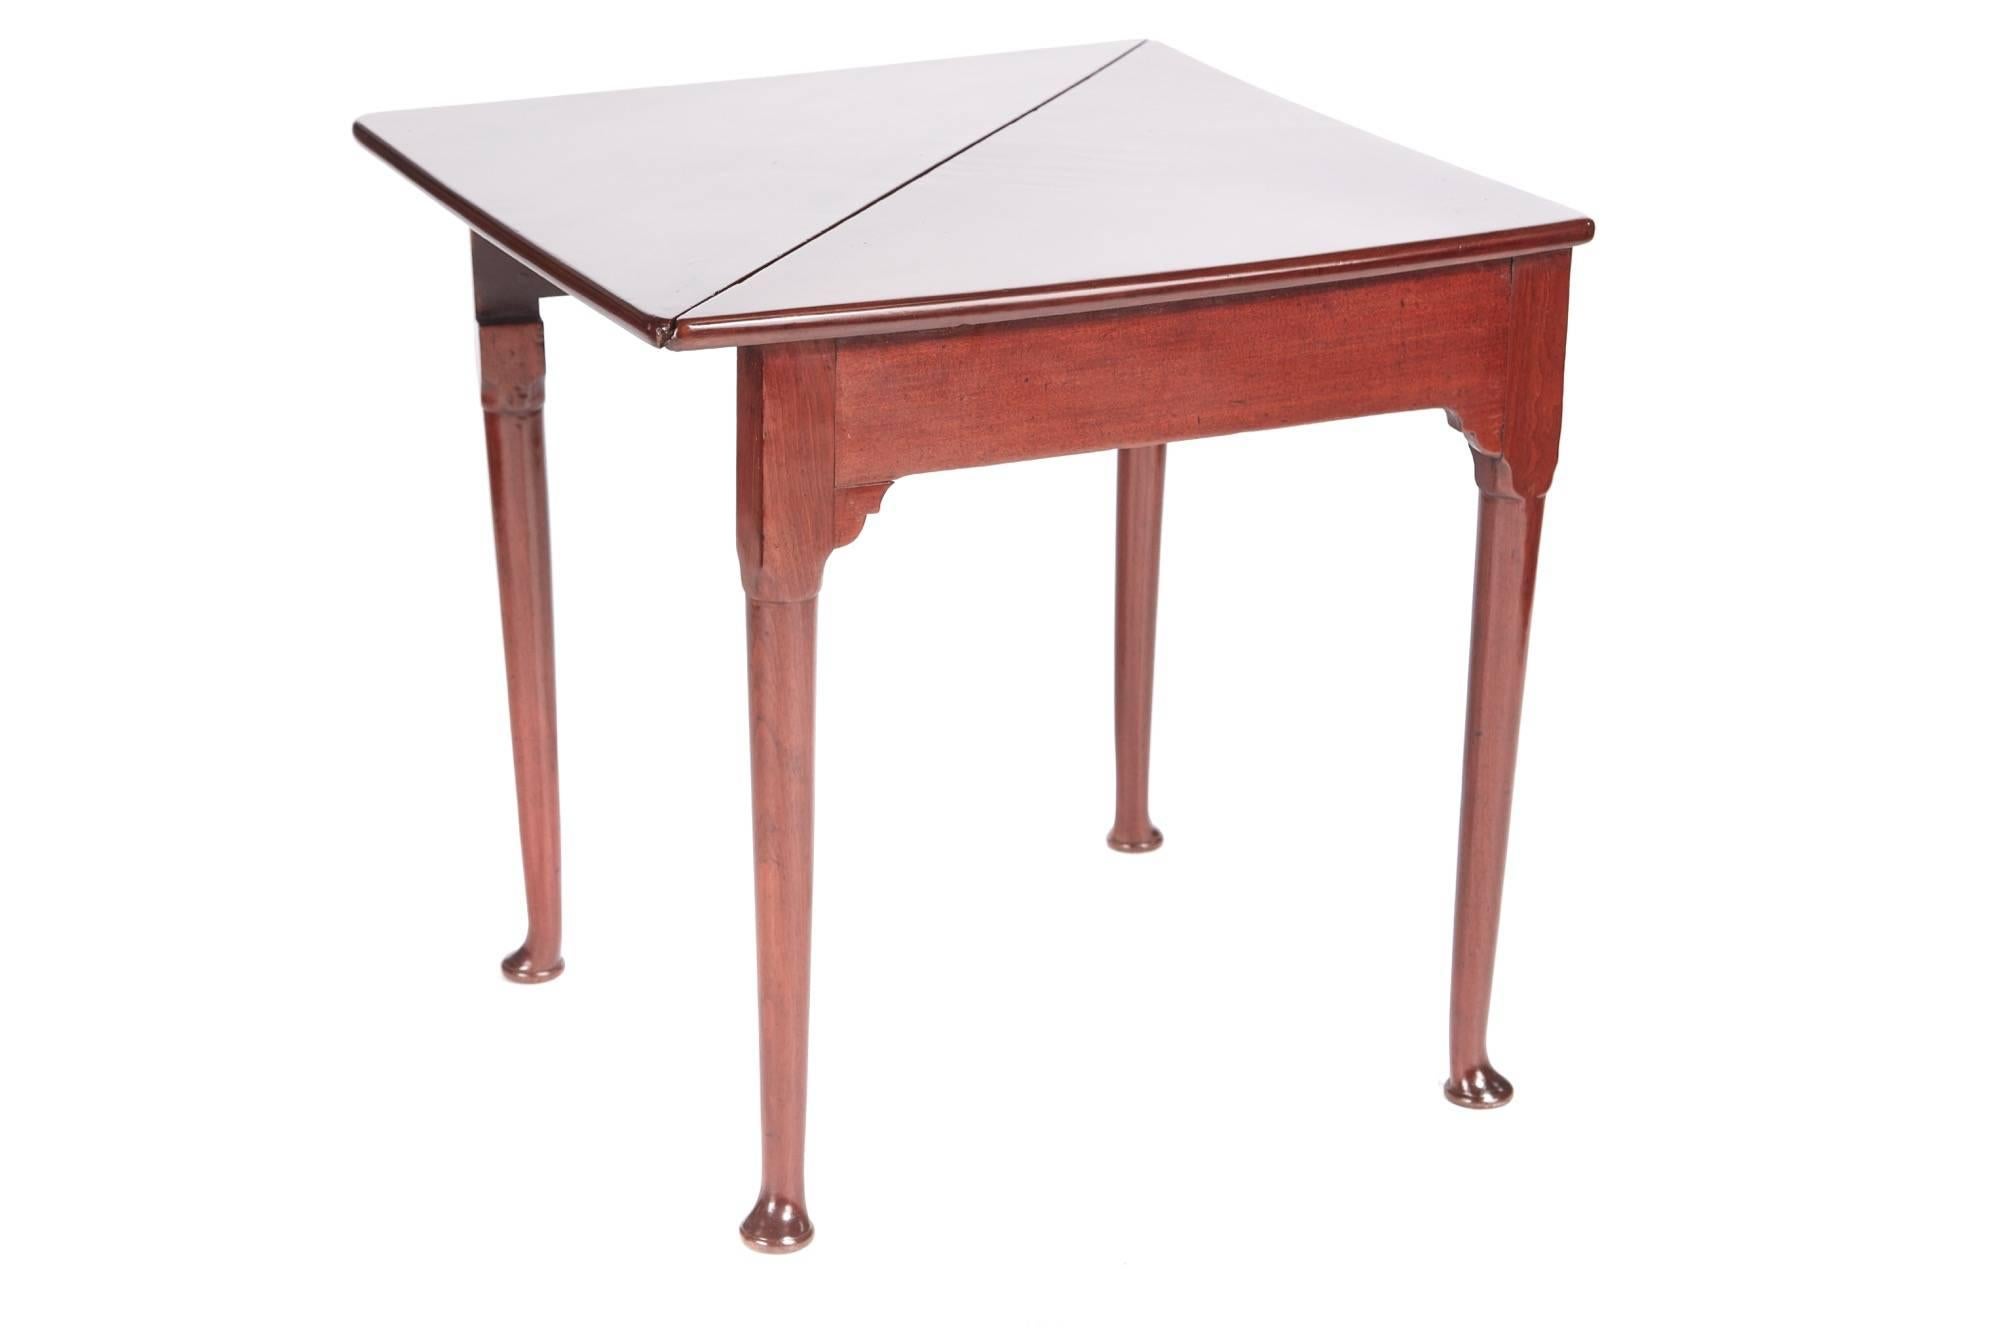 Unusual George III quality mahogany envelope table, with a lovely mahogany triangular top, one drop leaf lifting up froming a square top supported by four shaped turned legs with pad feet
Lovely color and condition
Measures: Closed 40